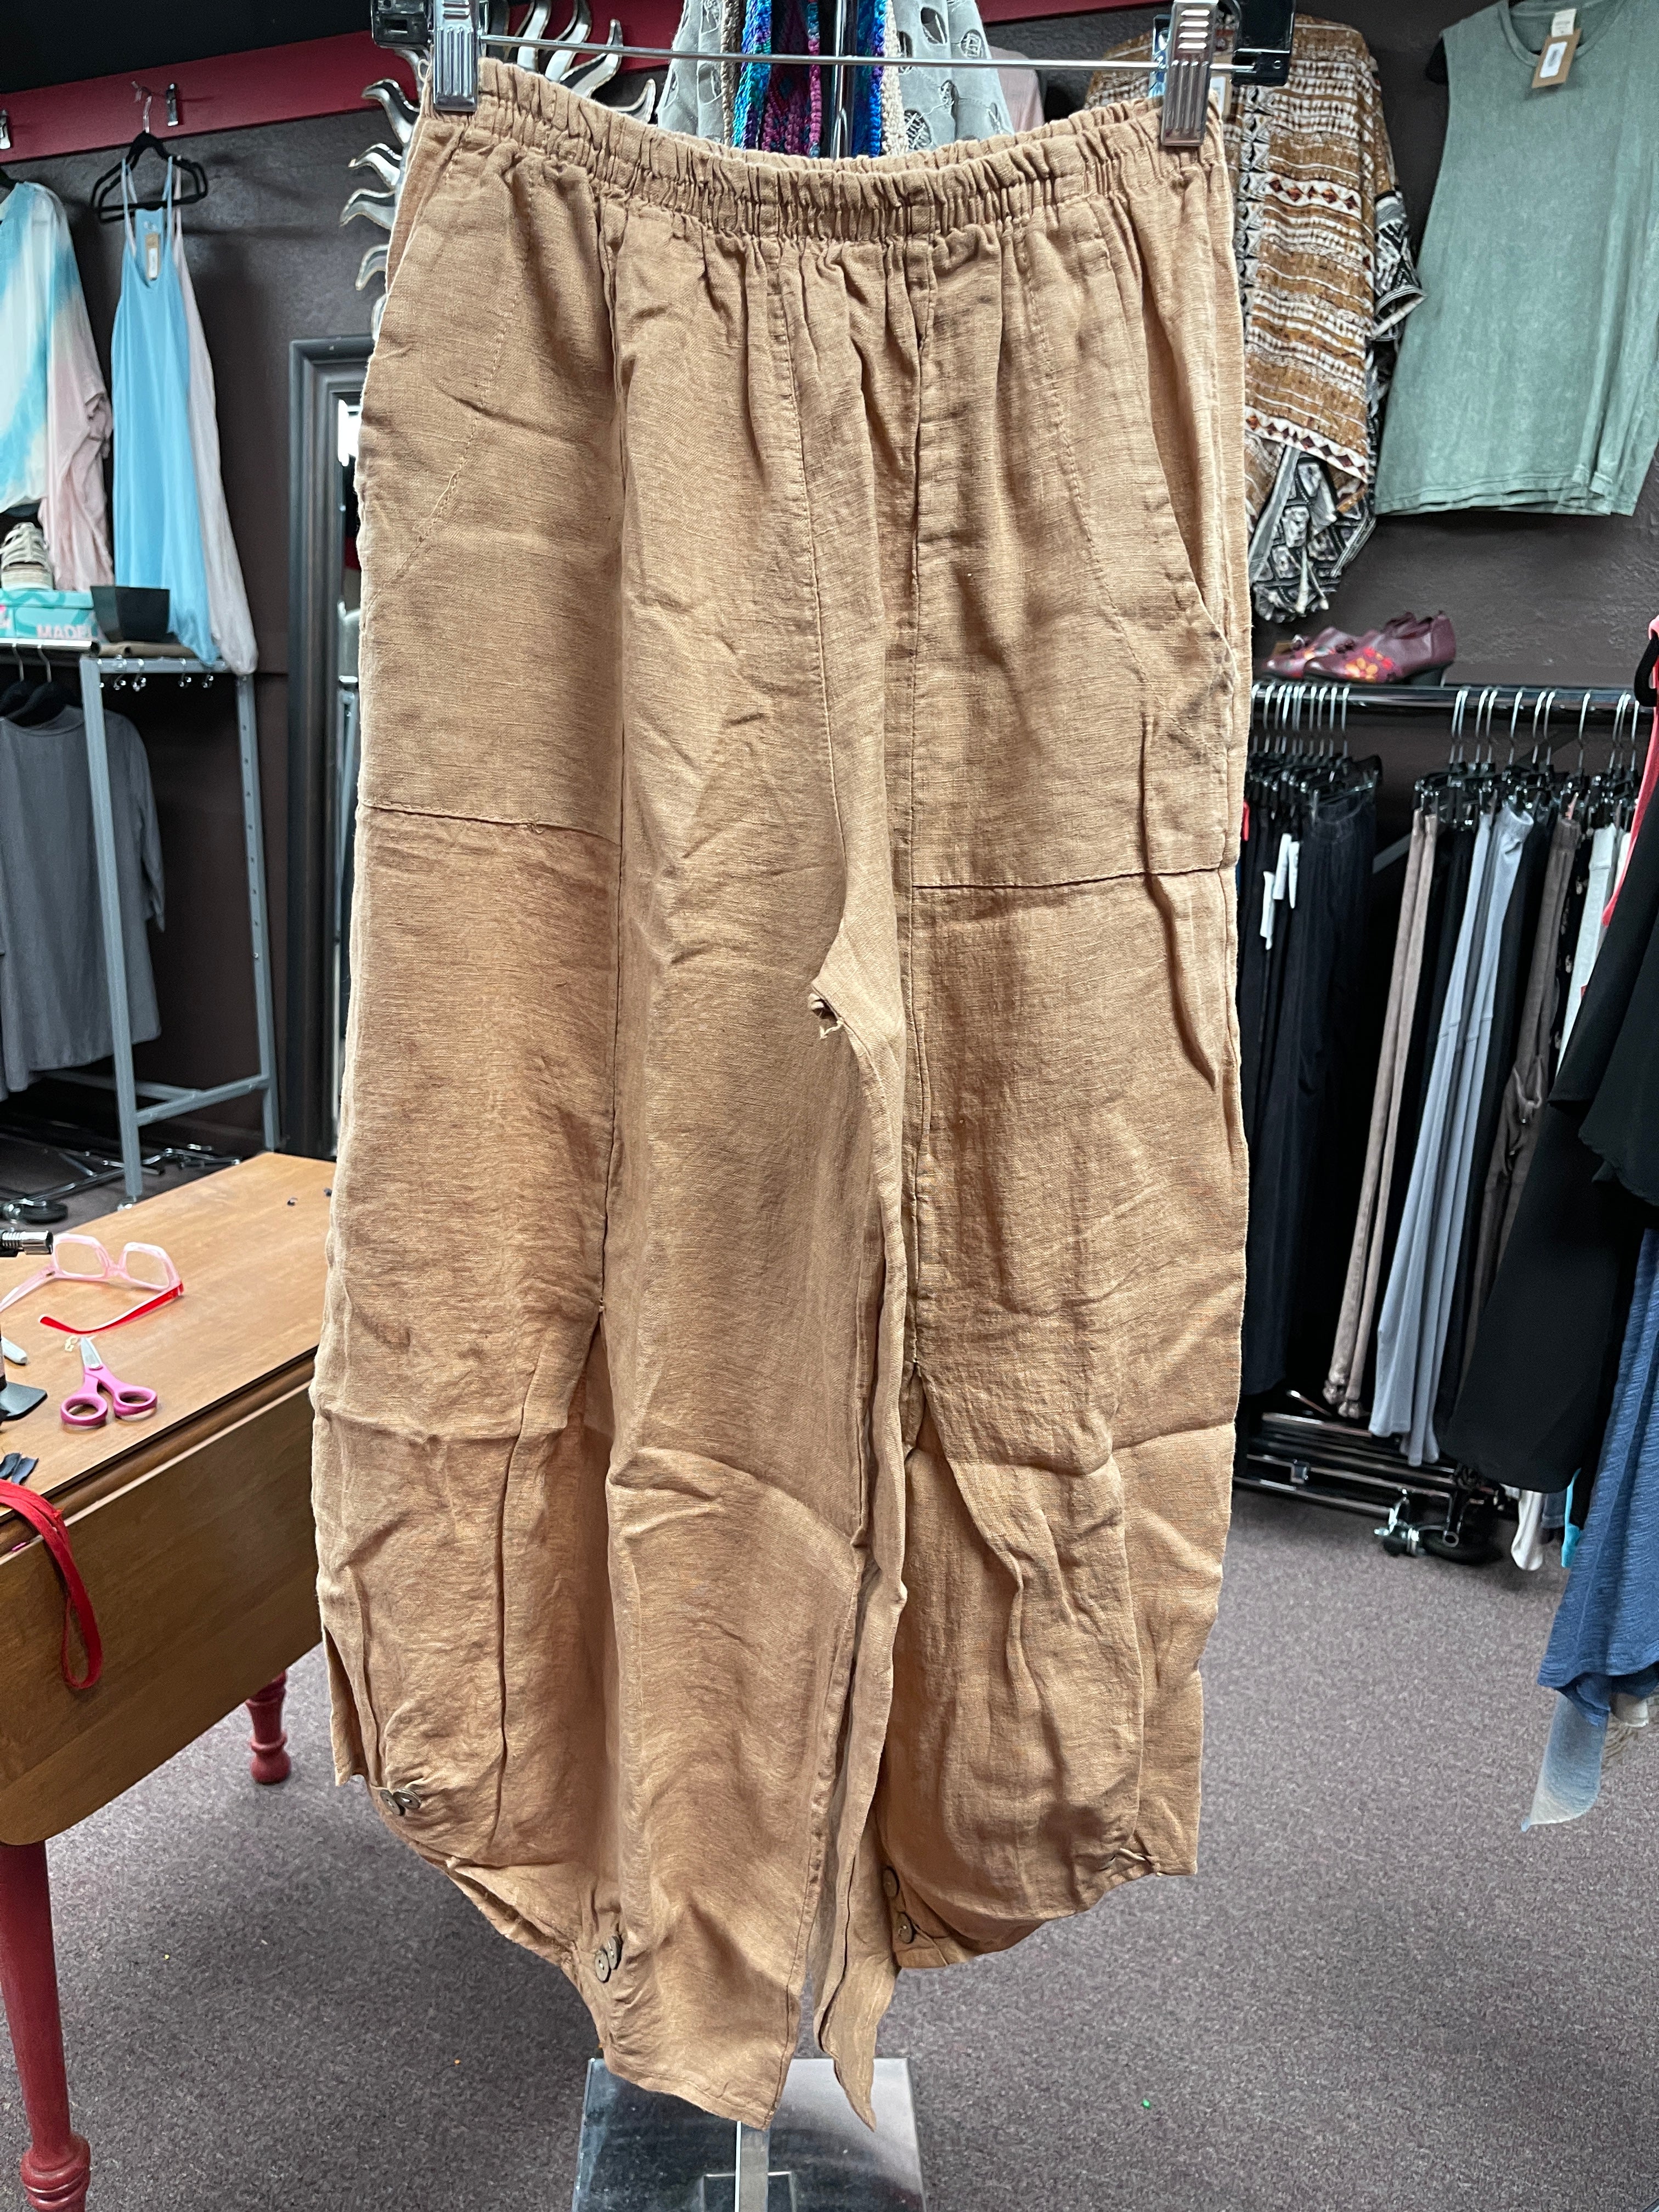 Italian, Linen Pants with button accent